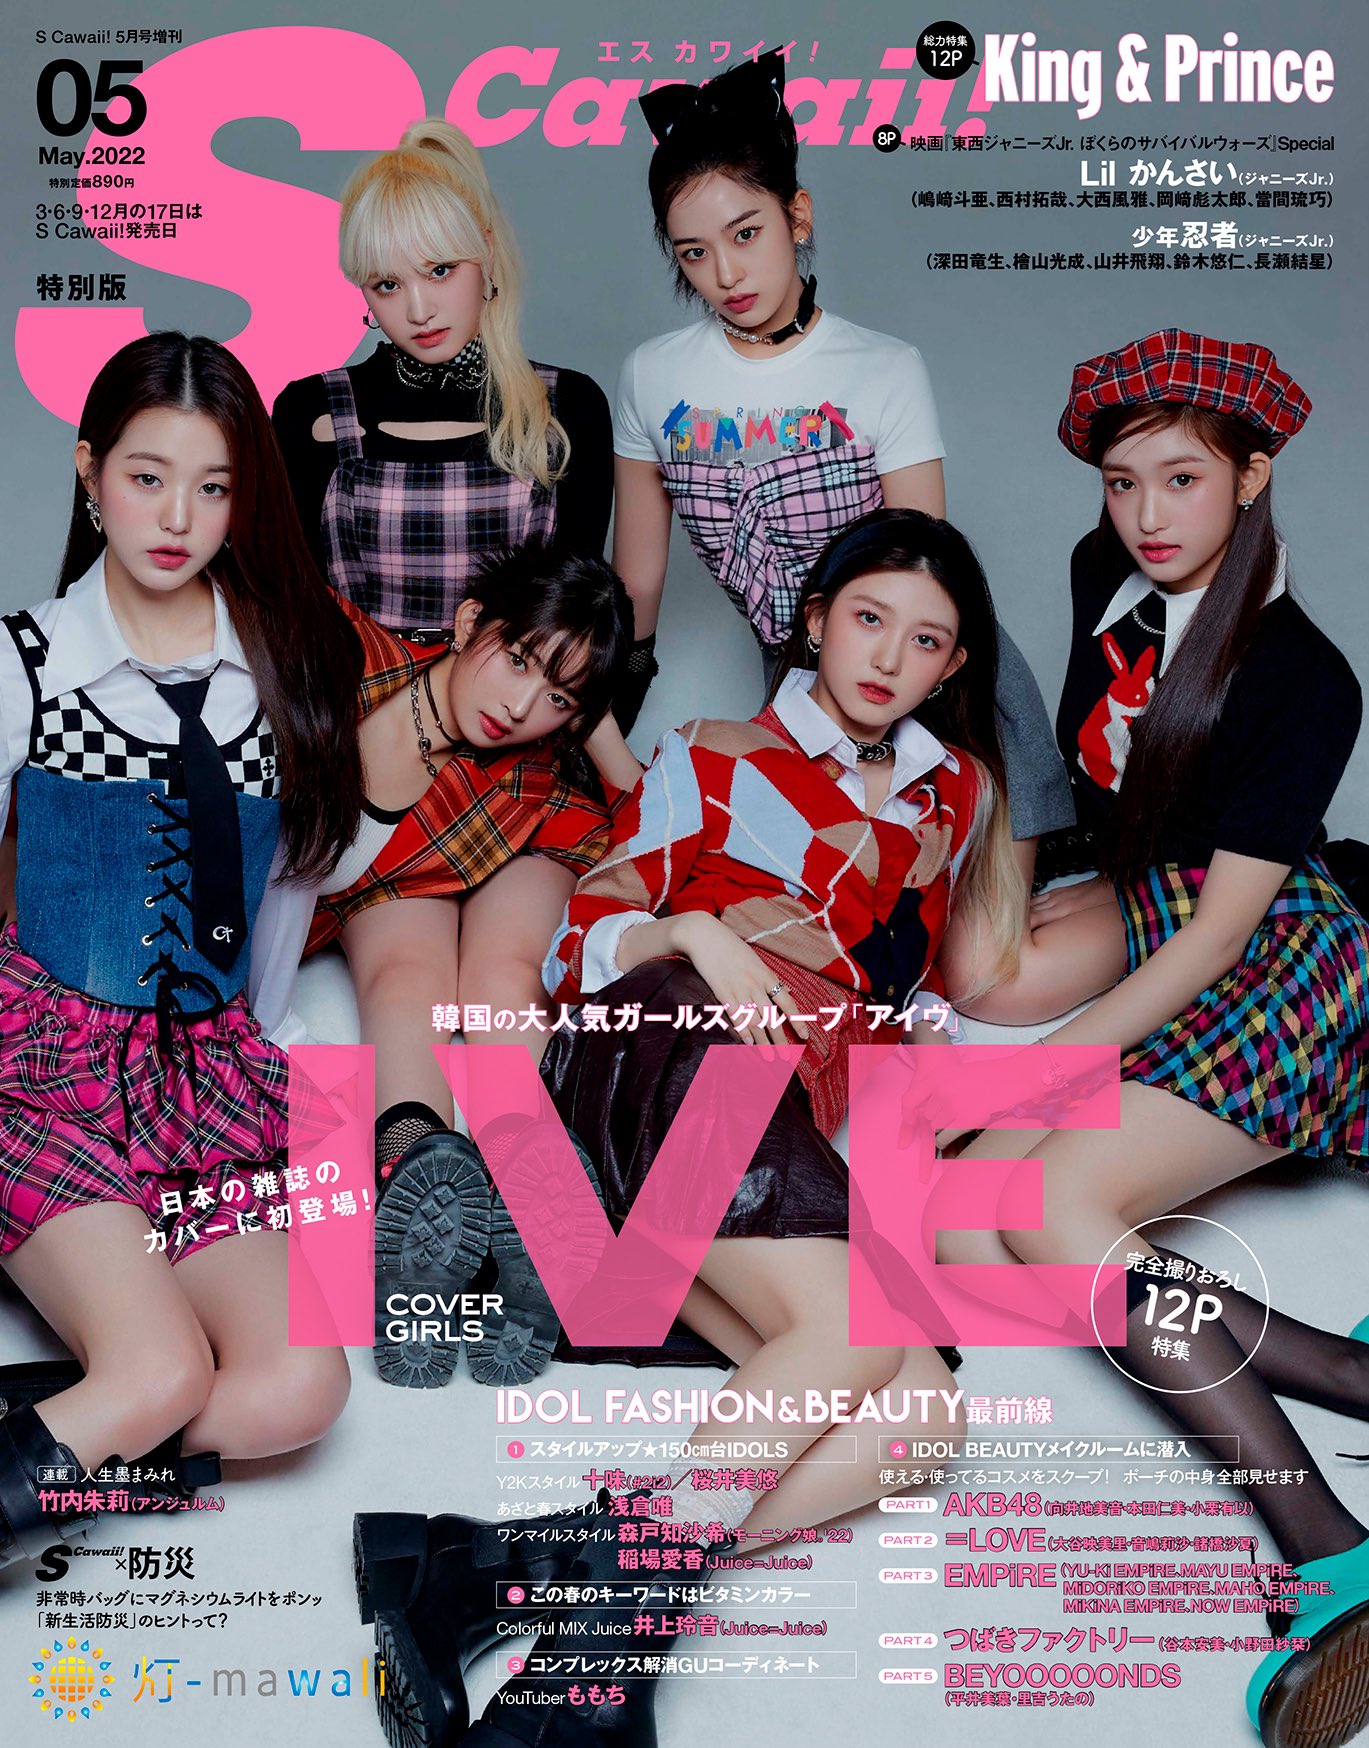 IVE Charts on Twitter: "[INFO] @IVEstarship will be cover of S Cawaii Japan!  It's their second OT6 magazine cover! 👏🥳 #IVE #아이브  https://t.co/pbvs63g7S4" / Twitter